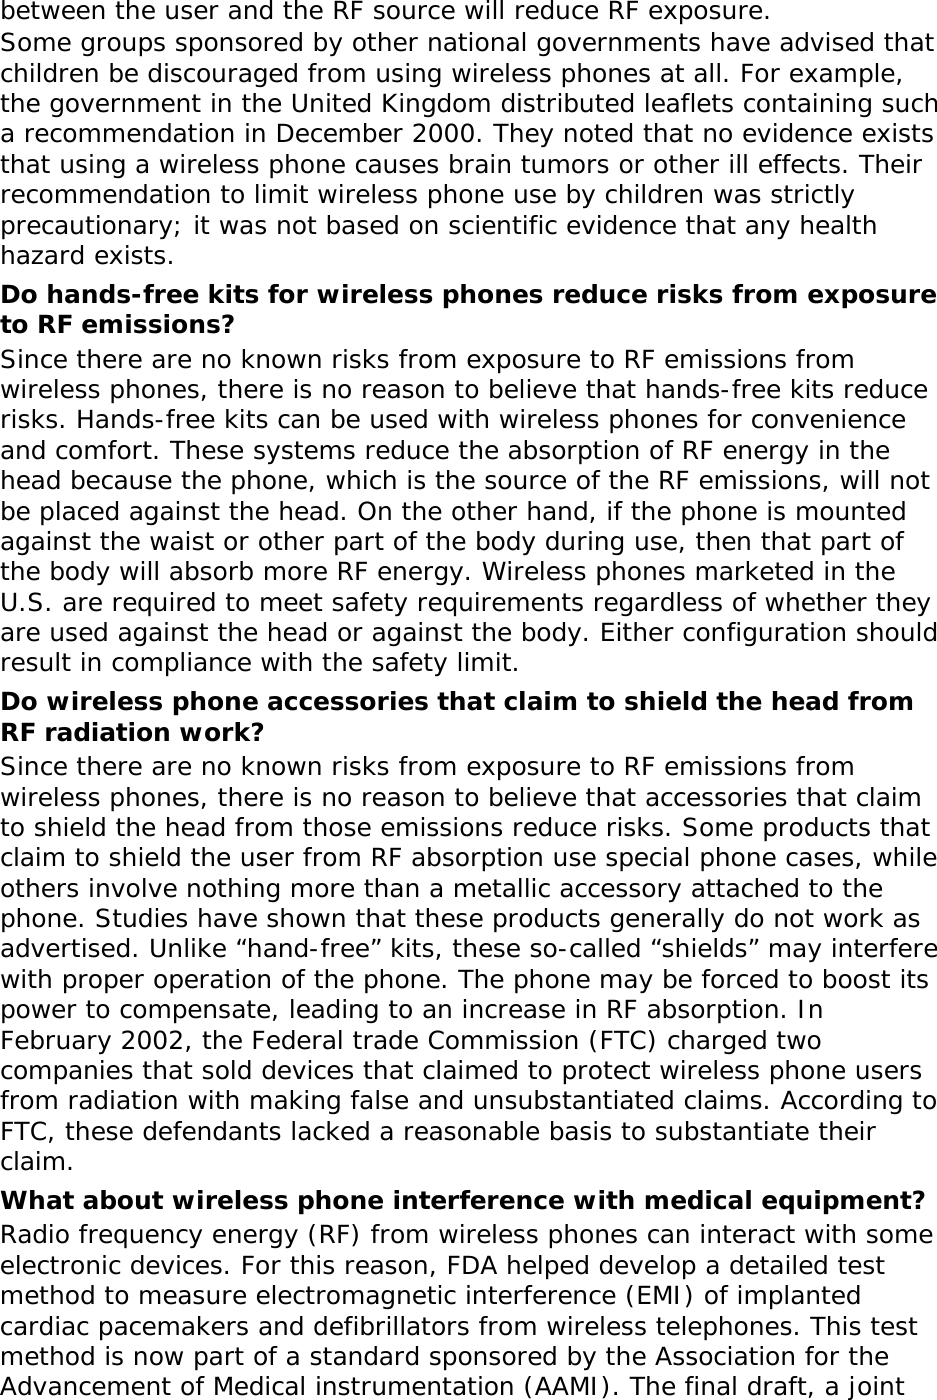 between the user and the RF source will reduce RF exposure. Some groups sponsored by other national governments have advised that children be discouraged from using wireless phones at all. For example, the government in the United Kingdom distributed leaflets containing such a recommendation in December 2000. They noted that no evidence exists that using a wireless phone causes brain tumors or other ill effects. Their recommendation to limit wireless phone use by children was strictly precautionary; it was not based on scientific evidence that any health hazard exists.  Do hands-free kits for wireless phones reduce risks from exposure to RF emissions? Since there are no known risks from exposure to RF emissions from wireless phones, there is no reason to believe that hands-free kits reduce risks. Hands-free kits can be used with wireless phones for convenience and comfort. These systems reduce the absorption of RF energy in the head because the phone, which is the source of the RF emissions, will not be placed against the head. On the other hand, if the phone is mounted against the waist or other part of the body during use, then that part of the body will absorb more RF energy. Wireless phones marketed in the U.S. are required to meet safety requirements regardless of whether they are used against the head or against the body. Either configuration should result in compliance with the safety limit. Do wireless phone accessories that claim to shield the head from RF radiation work? Since there are no known risks from exposure to RF emissions from wireless phones, there is no reason to believe that accessories that claim to shield the head from those emissions reduce risks. Some products that claim to shield the user from RF absorption use special phone cases, while others involve nothing more than a metallic accessory attached to the phone. Studies have shown that these products generally do not work as advertised. Unlike “hand-free” kits, these so-called “shields” may interfere with proper operation of the phone. The phone may be forced to boost its power to compensate, leading to an increase in RF absorption. In February 2002, the Federal trade Commission (FTC) charged two companies that sold devices that claimed to protect wireless phone users from radiation with making false and unsubstantiated claims. According to FTC, these defendants lacked a reasonable basis to substantiate their claim. What about wireless phone interference with medical equipment? Radio frequency energy (RF) from wireless phones can interact with some electronic devices. For this reason, FDA helped develop a detailed test method to measure electromagnetic interference (EMI) of implanted cardiac pacemakers and defibrillators from wireless telephones. This test method is now part of a standard sponsored by the Association for the Advancement of Medical instrumentation (AAMI). The final draft, a joint 